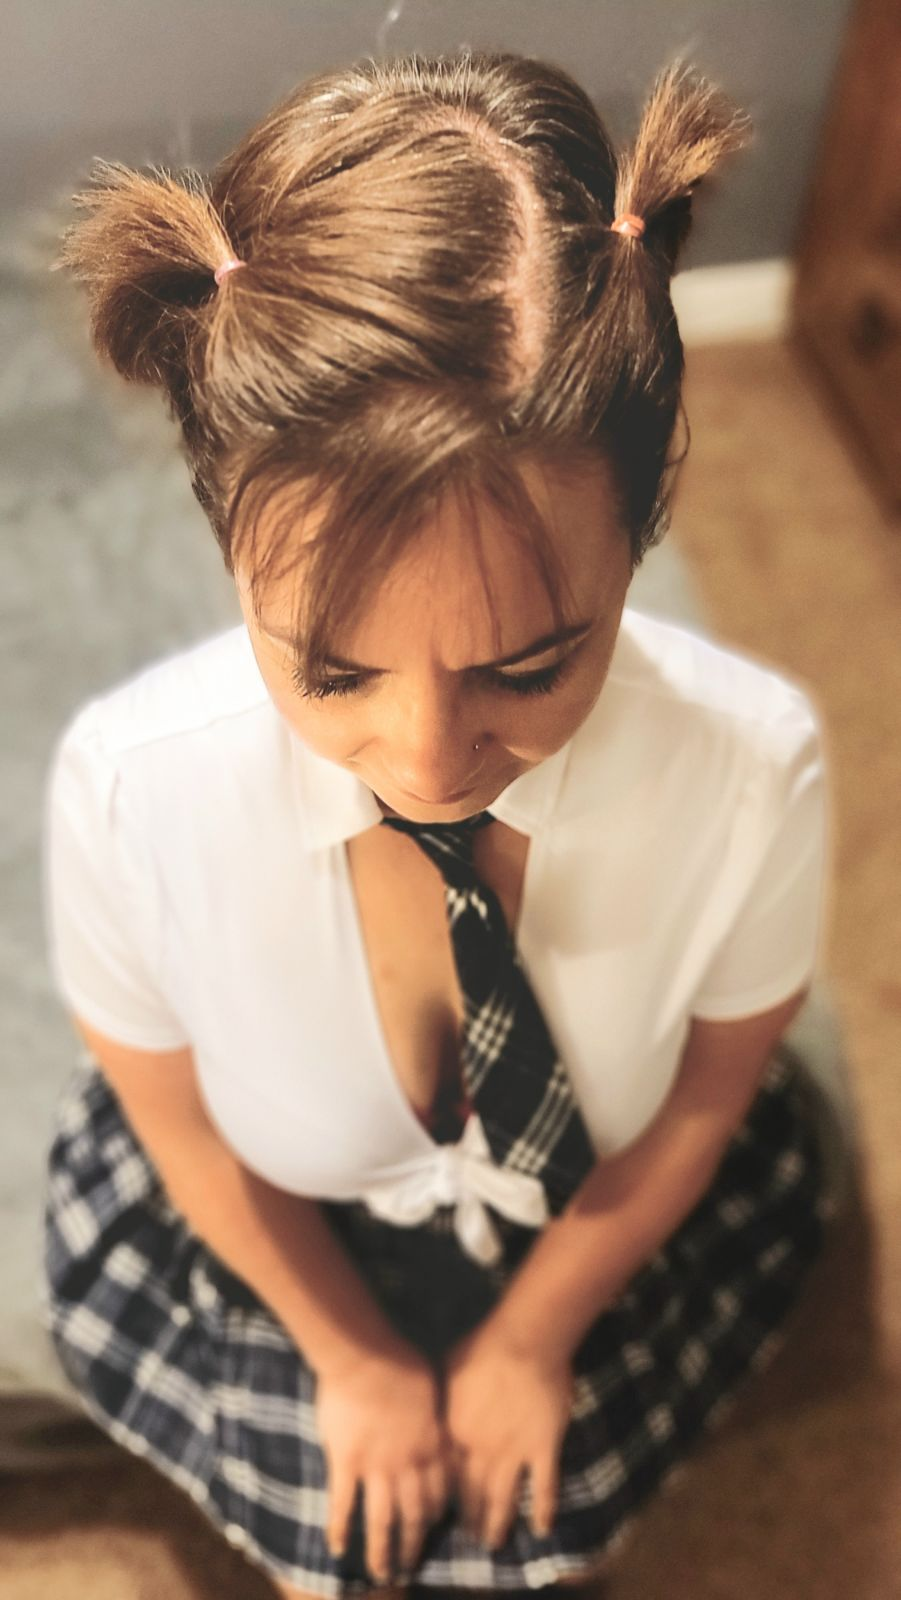 Porn Pics p1nkcheeked:Playing schoolgirl for Daddy…